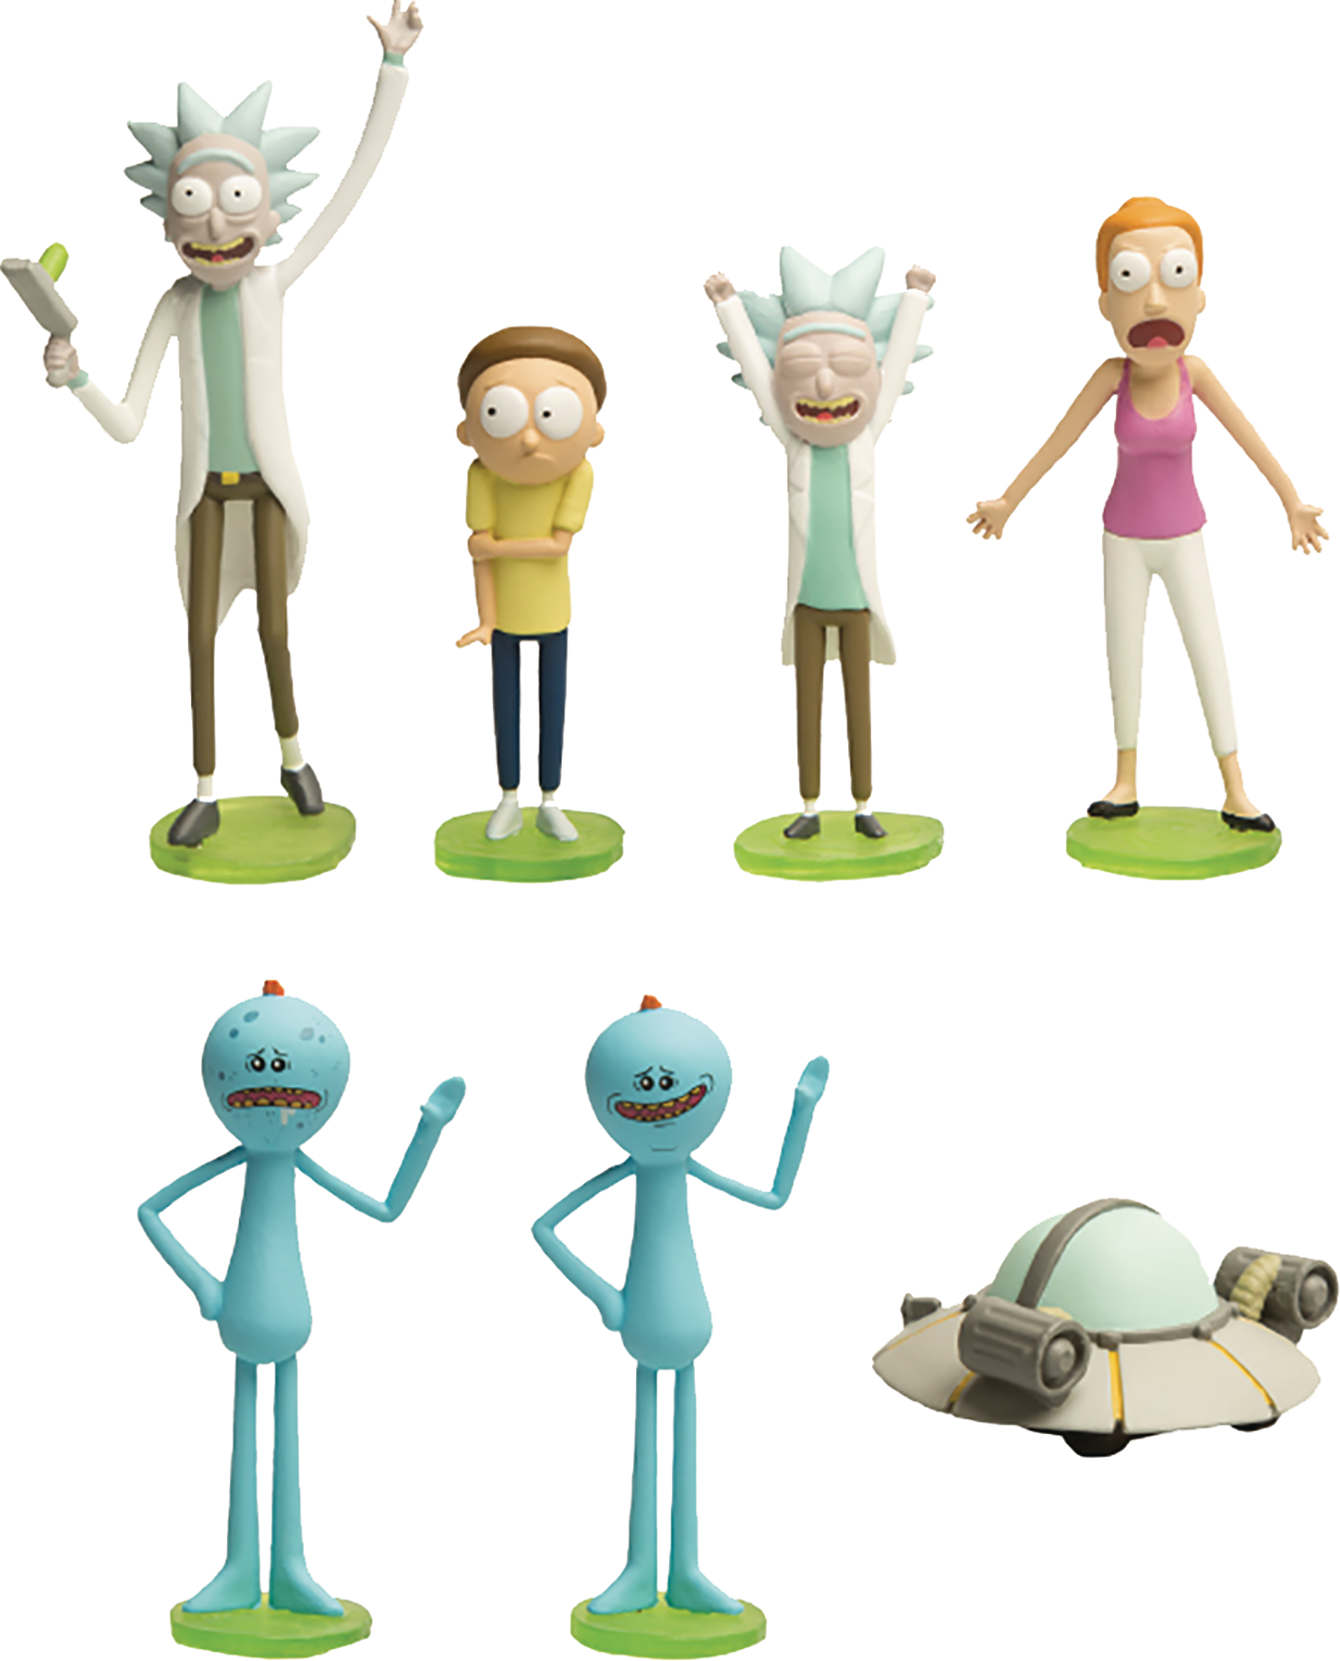 Rick-and-Morty-product-line.jpg